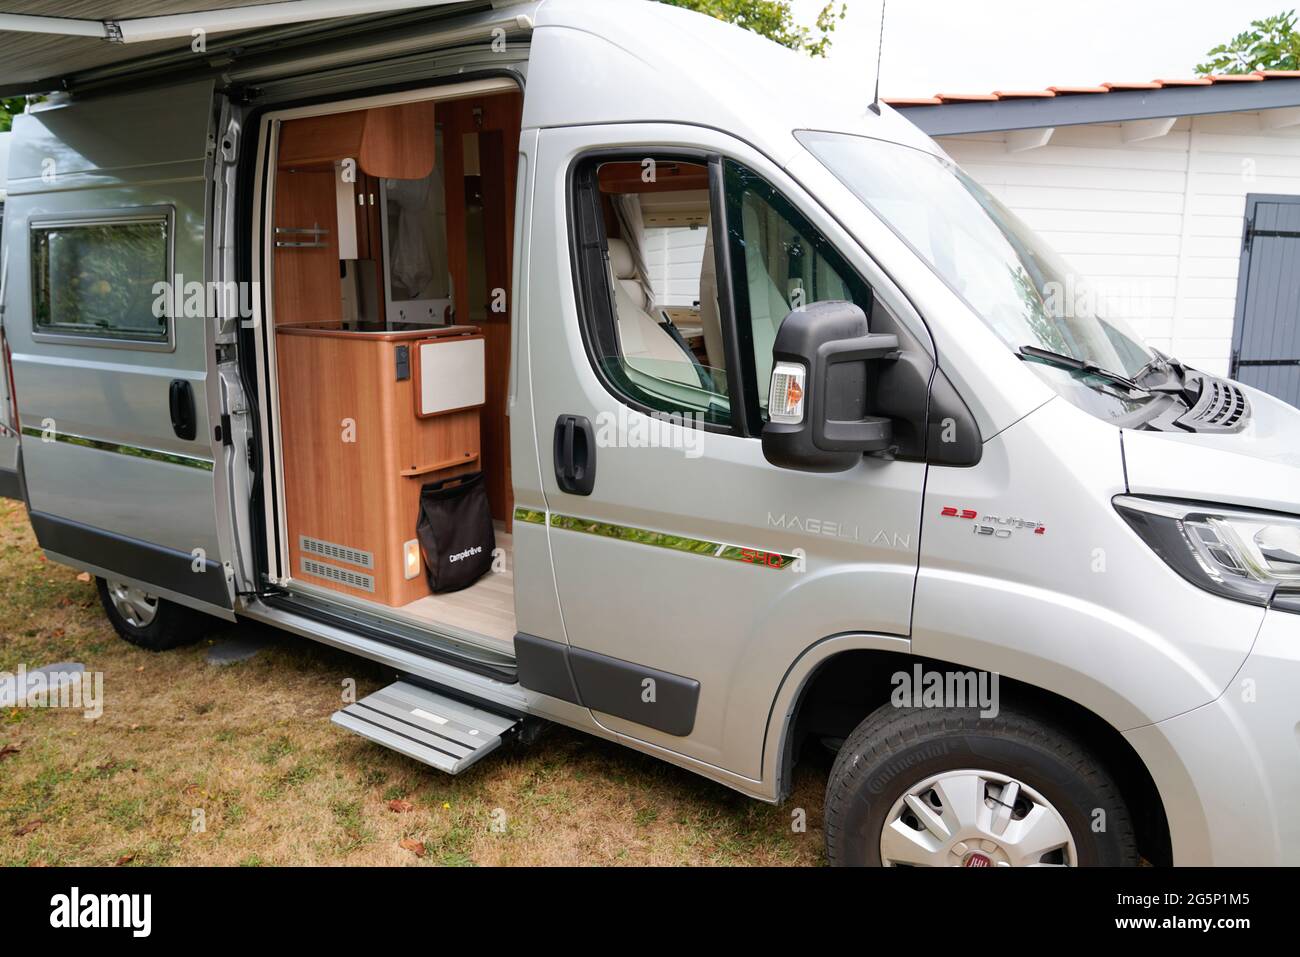 Bordeaux , Aquitaine France - 01 10 2021 : Fiat ducato camper Van motorhome  parked in camping area Stock Photo - Alamy